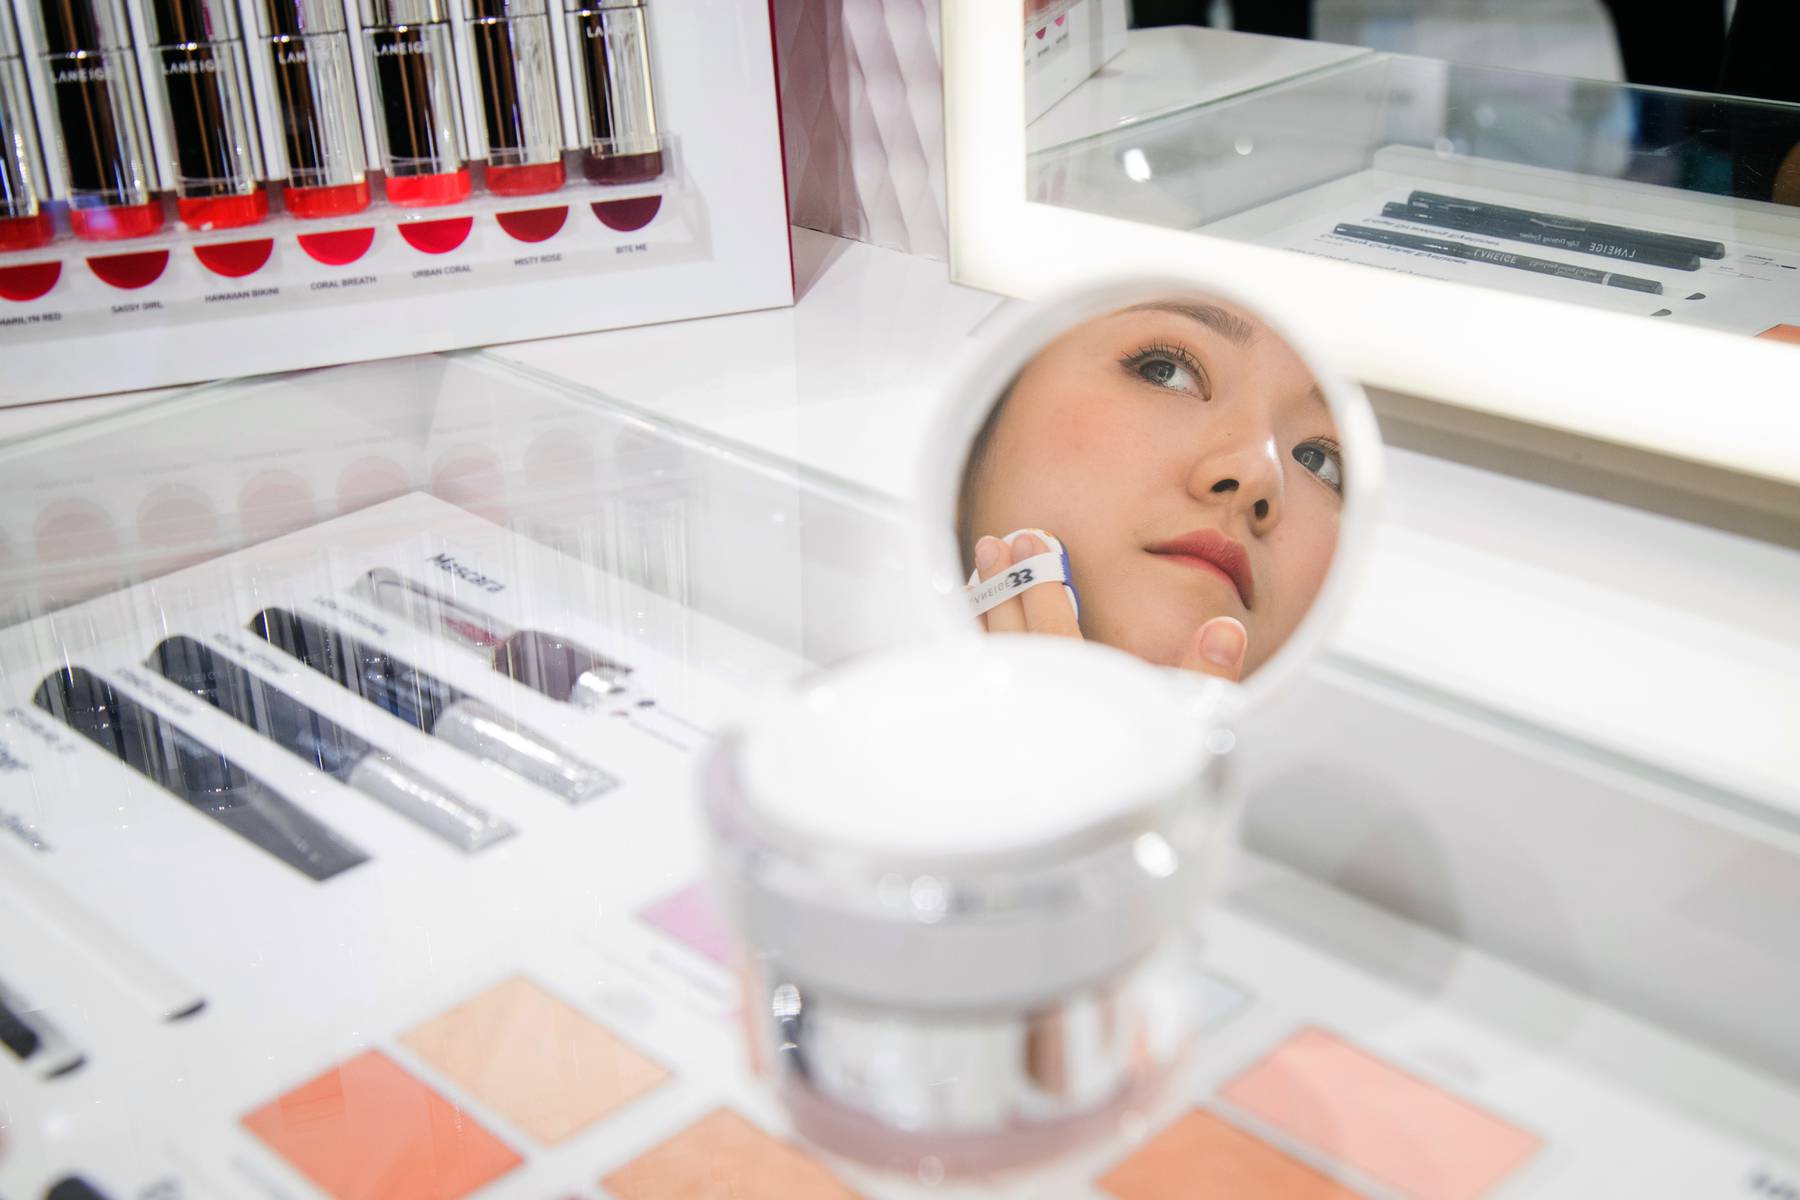 A store employee applying foundation in a Laneige boutique, which is an Amorepacific brand.